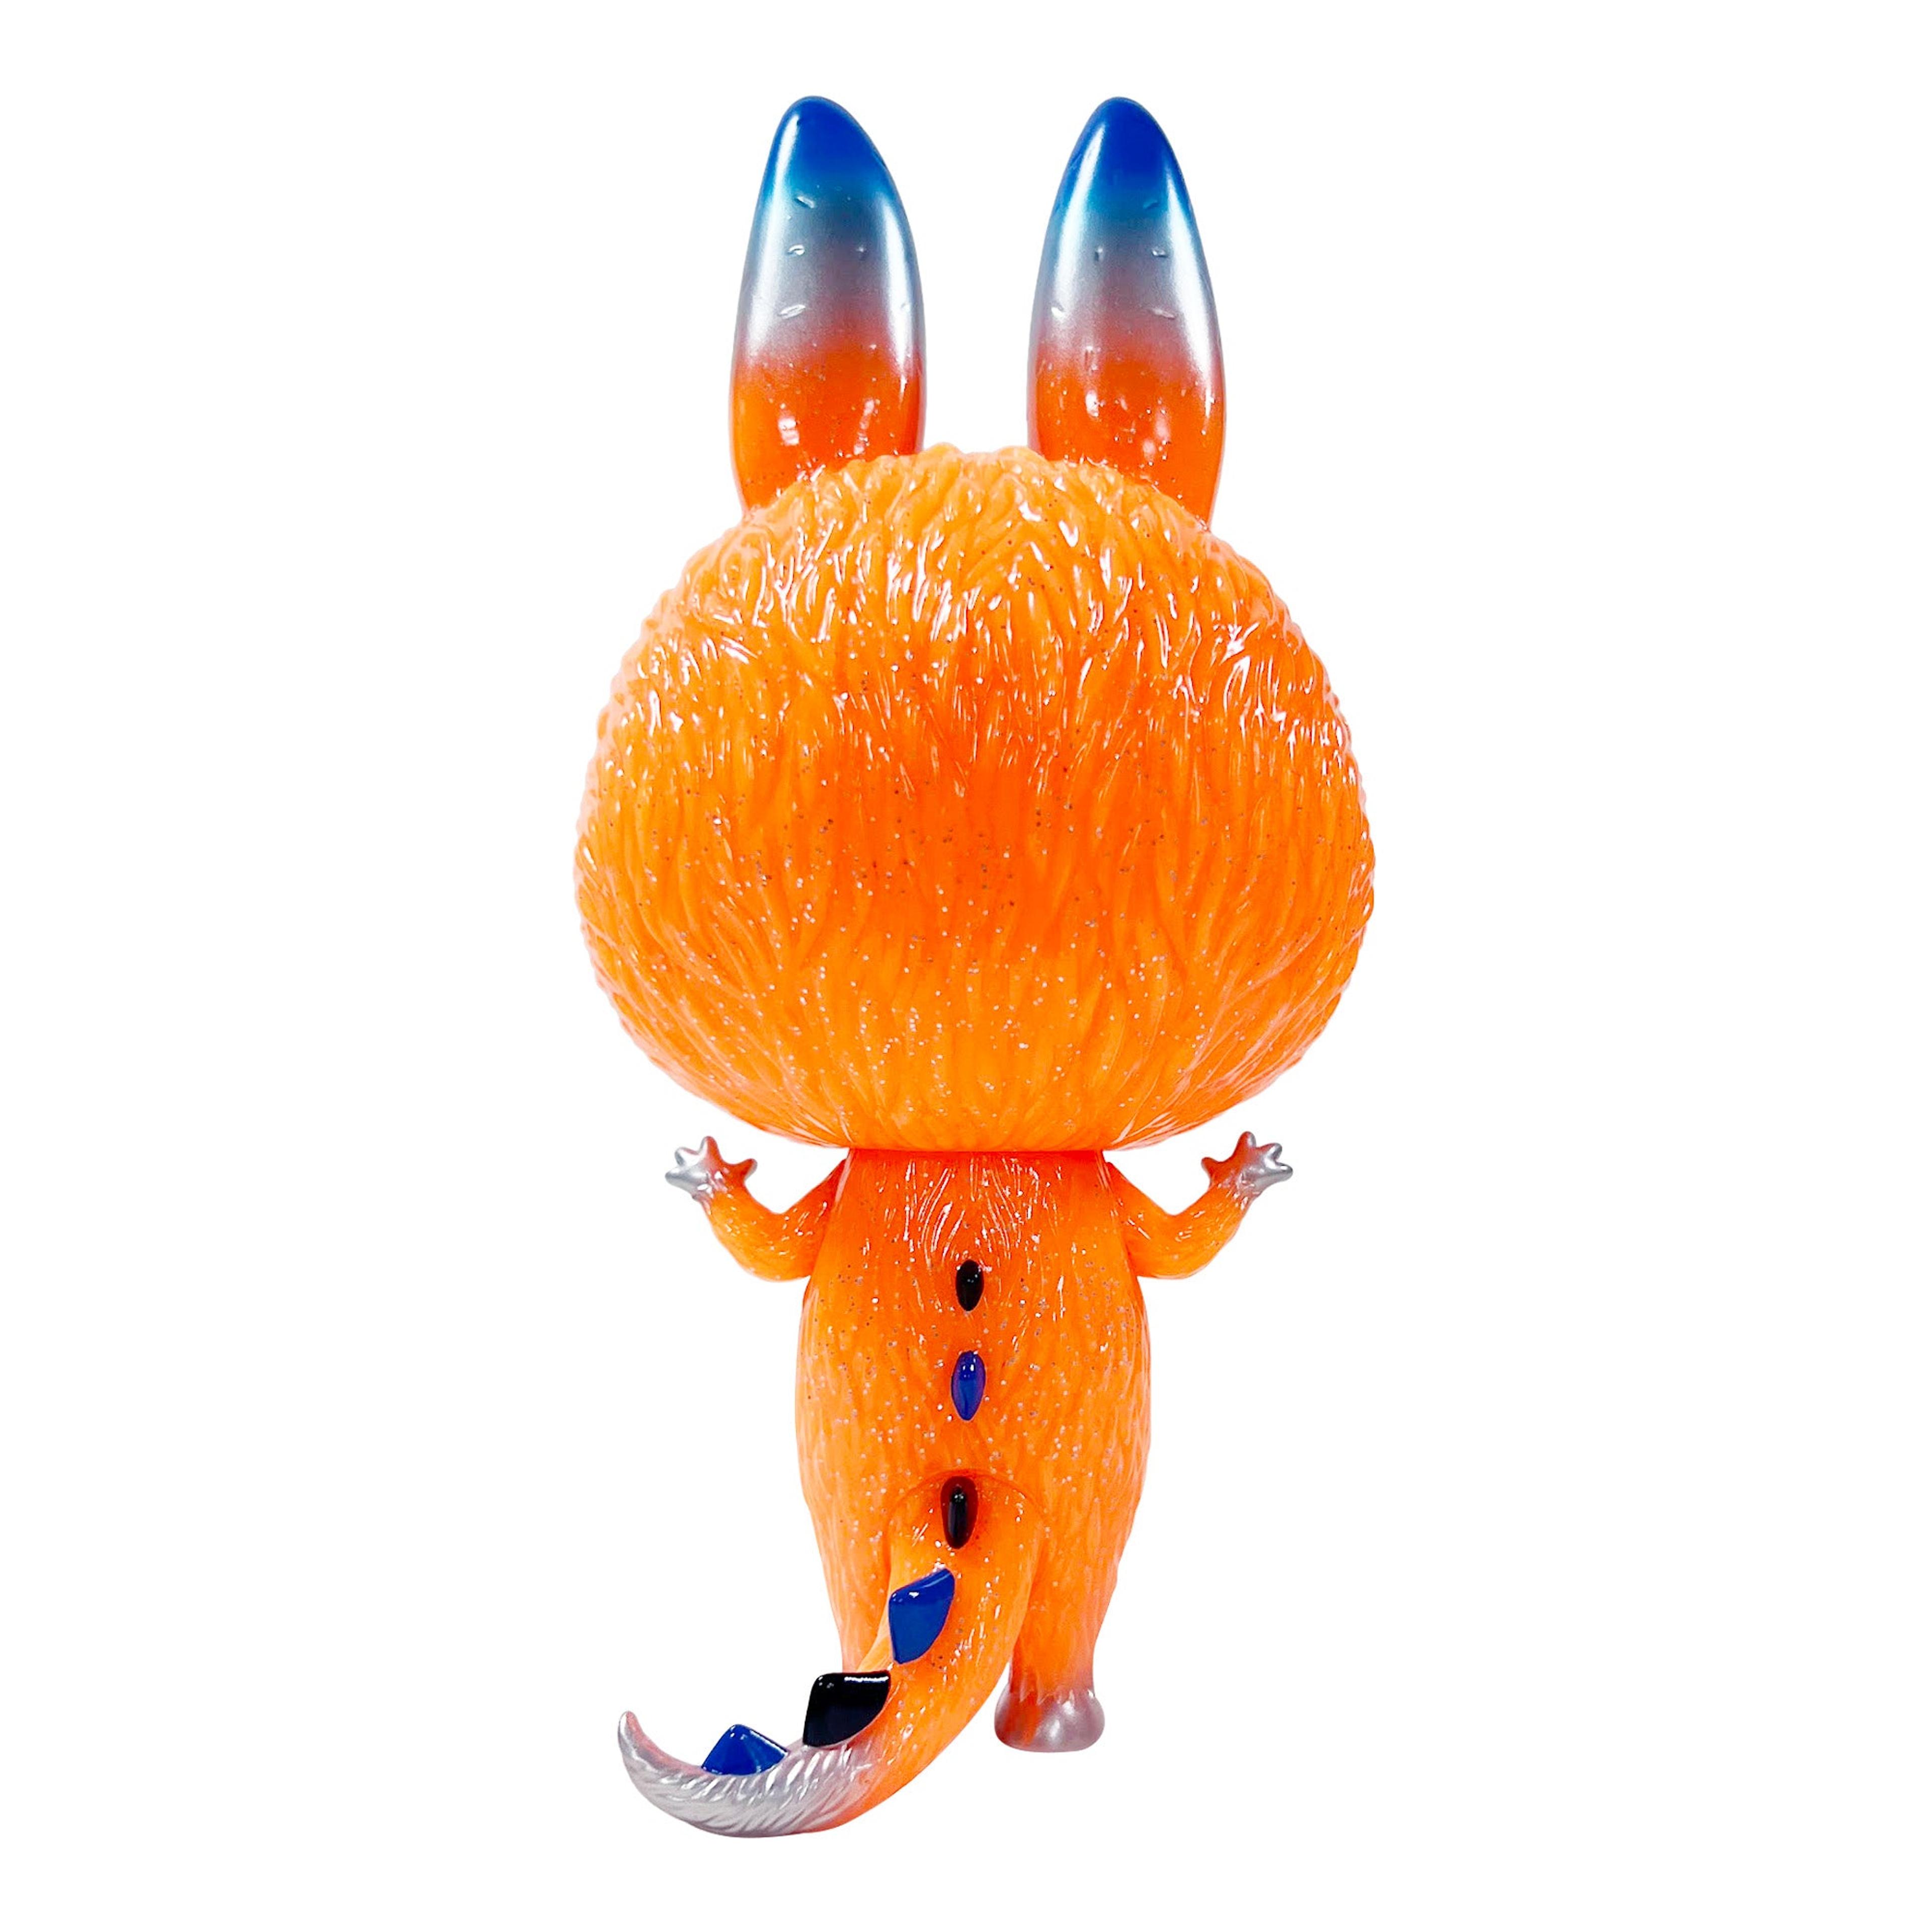 Alternate View 3 of How2Work x Kasing Lung - Zimomo Toy Tokyo Exclusive